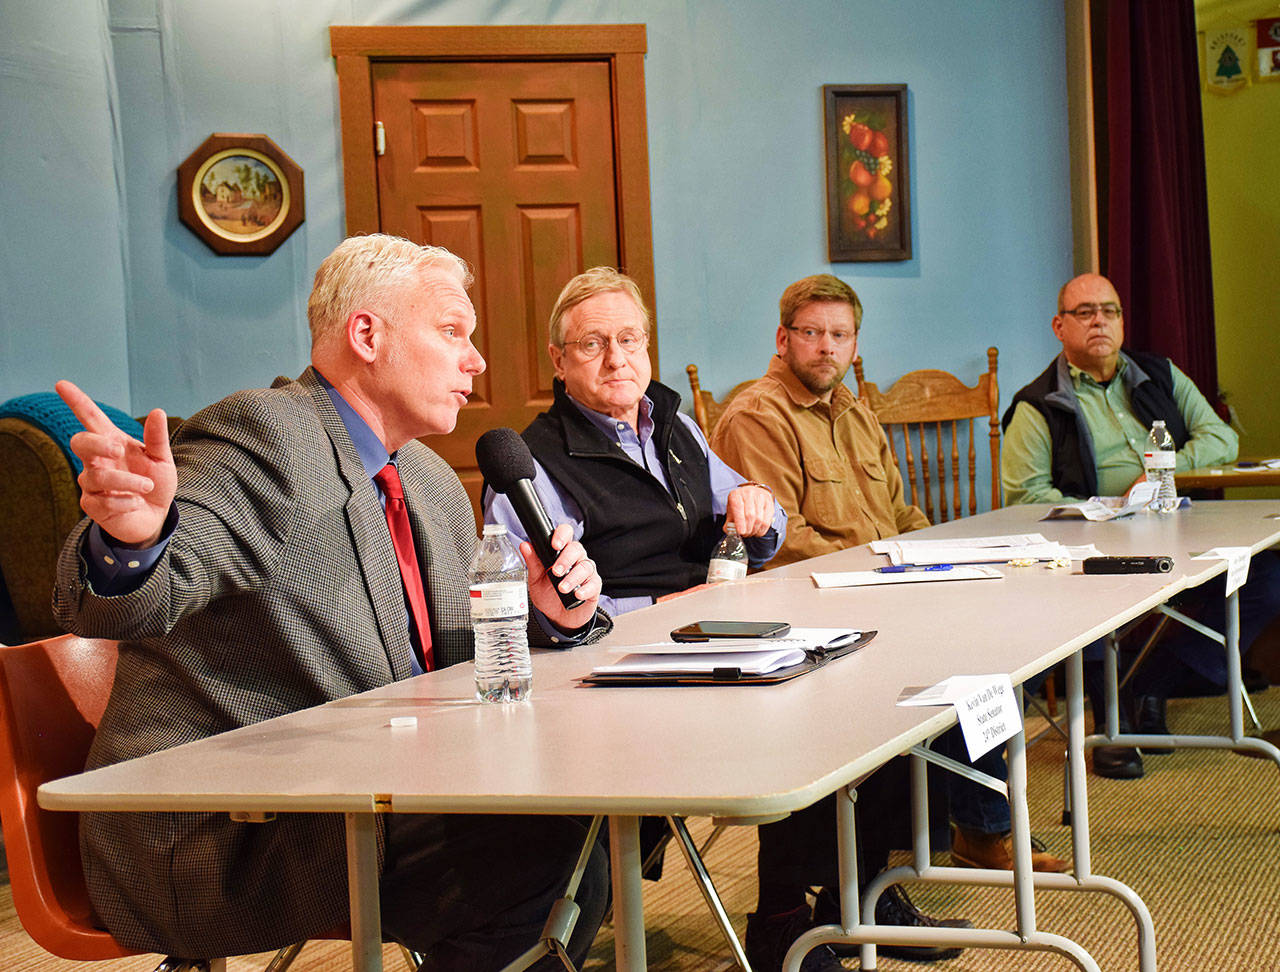 24th District legislators (L-R) Sen. Kevin Van De Wege, Rep. Steve Tharinger, and Rep. Mike Chapman, answer questions from North Beach News editor Angelo Bruscas and members of the Ocean Shores Town Hall on March 22.